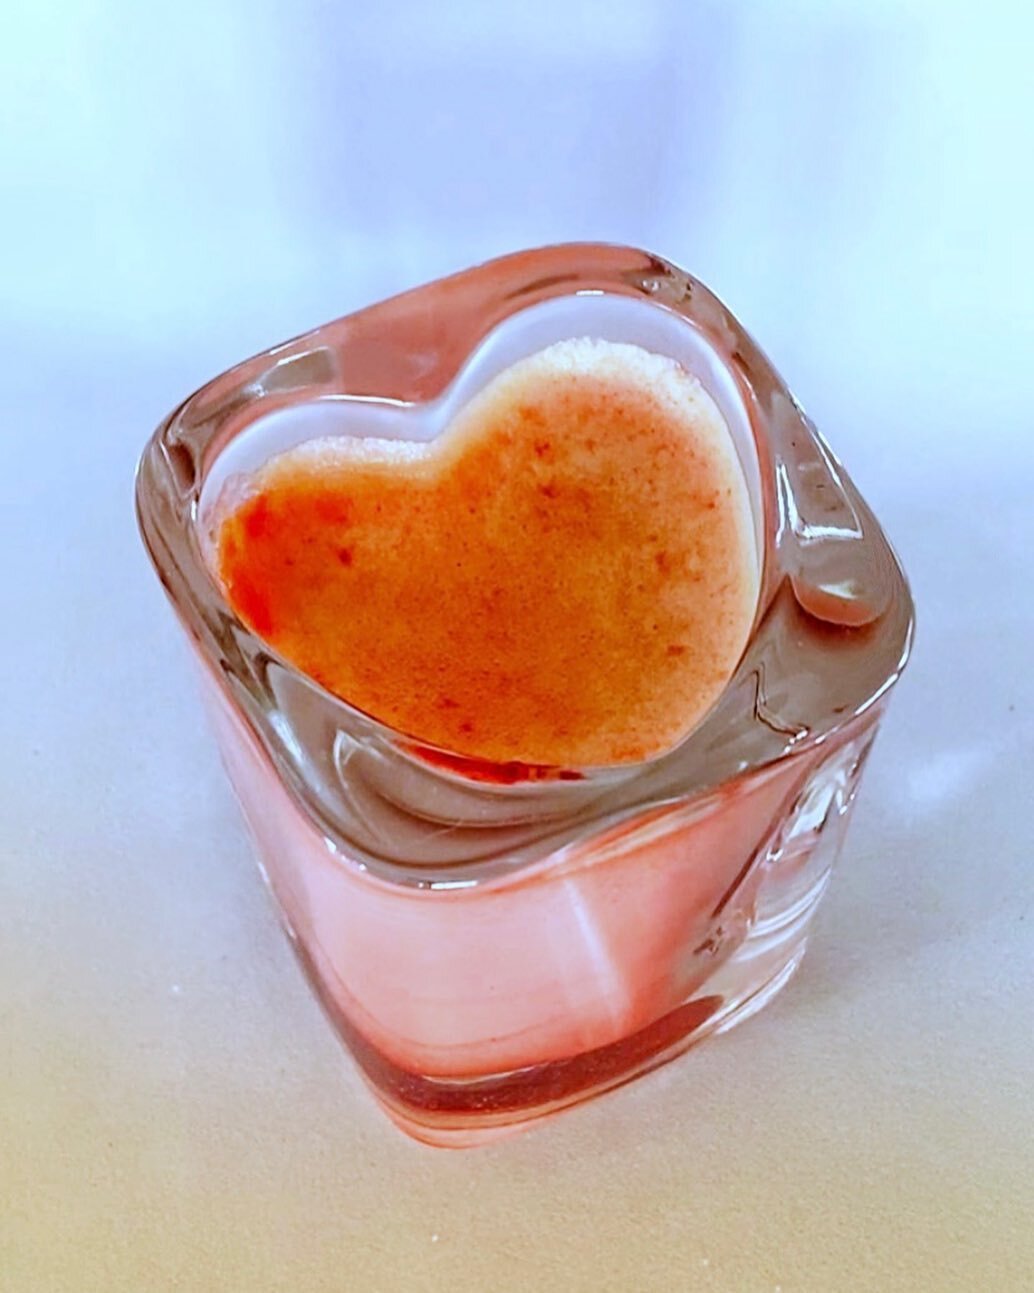 Whether you&rsquo;re celebrating Valentine&rsquo;s Day, Galentine&rsquo;s Day, or just treating yourself, our cr&egrave;me br&ucirc;l&eacute;e will add some sweetness to make your day extra special 💕 Place your order today! www.cremebru.com